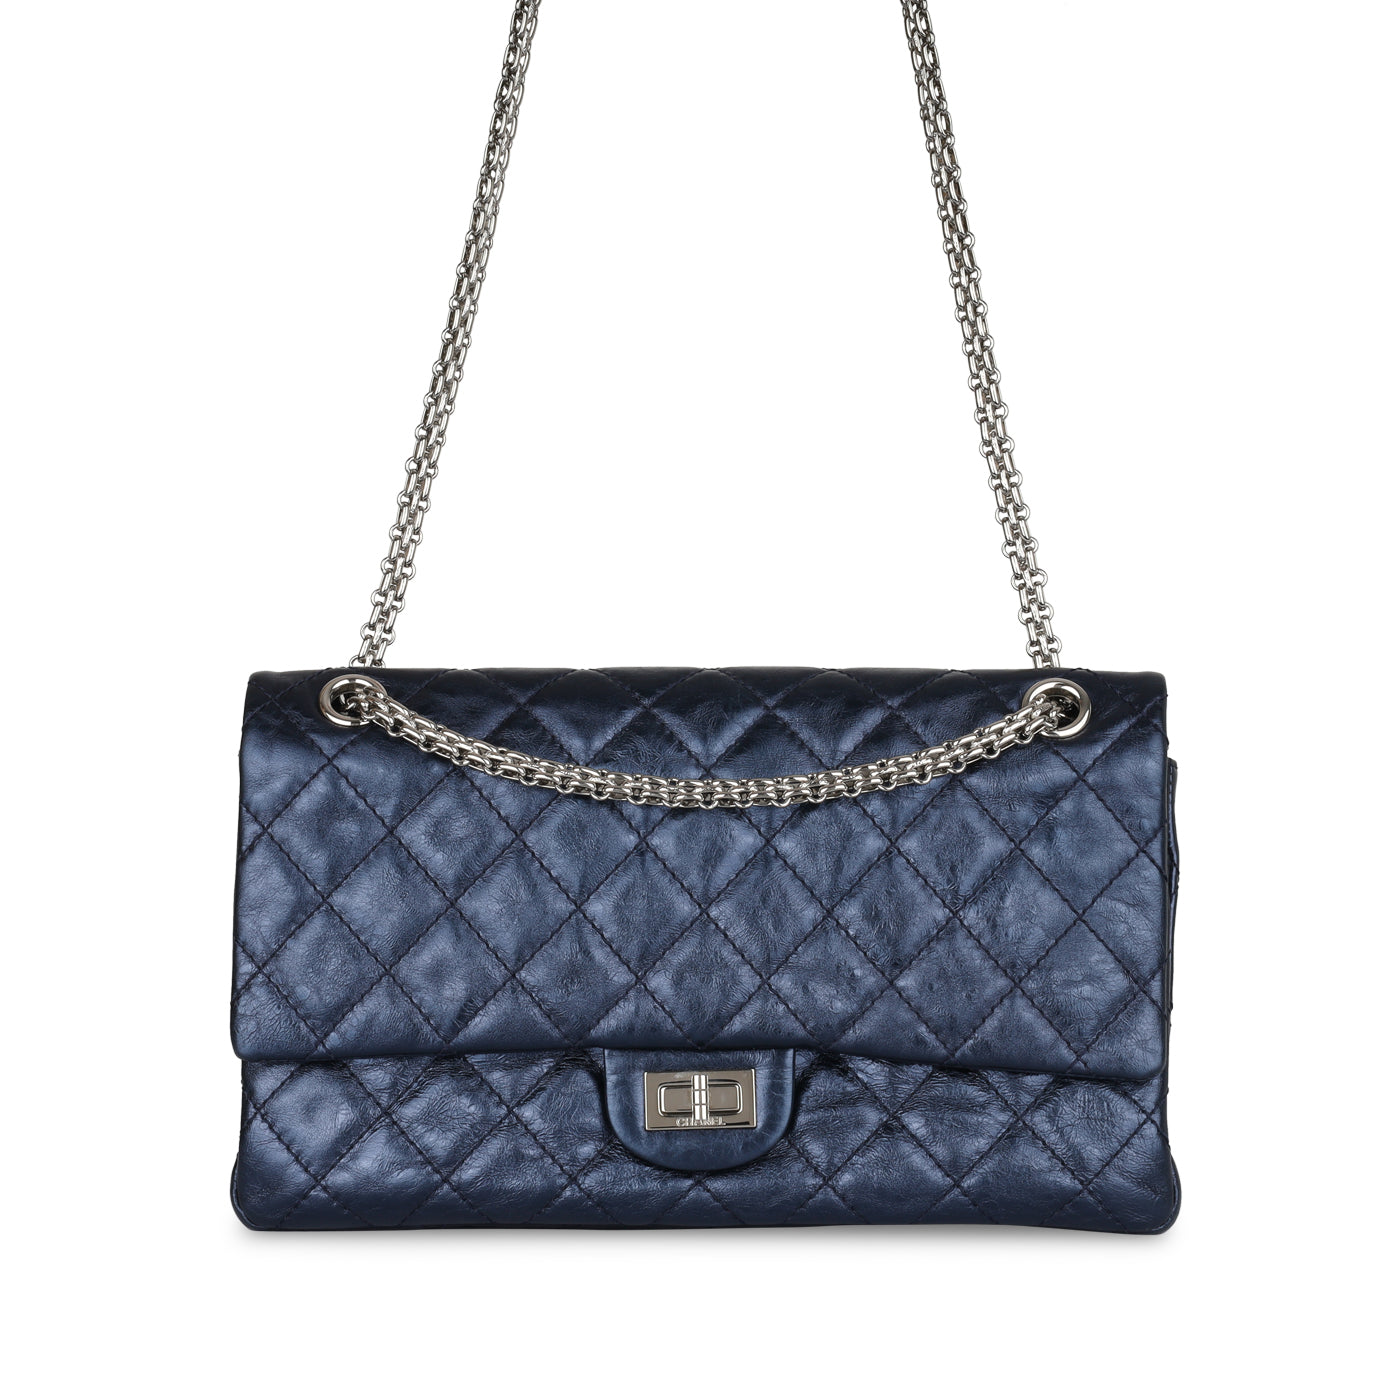 Chanel - 2.55 Re-issue Flap Bag - 226 - Navy Metallic RHW - Excellent ...